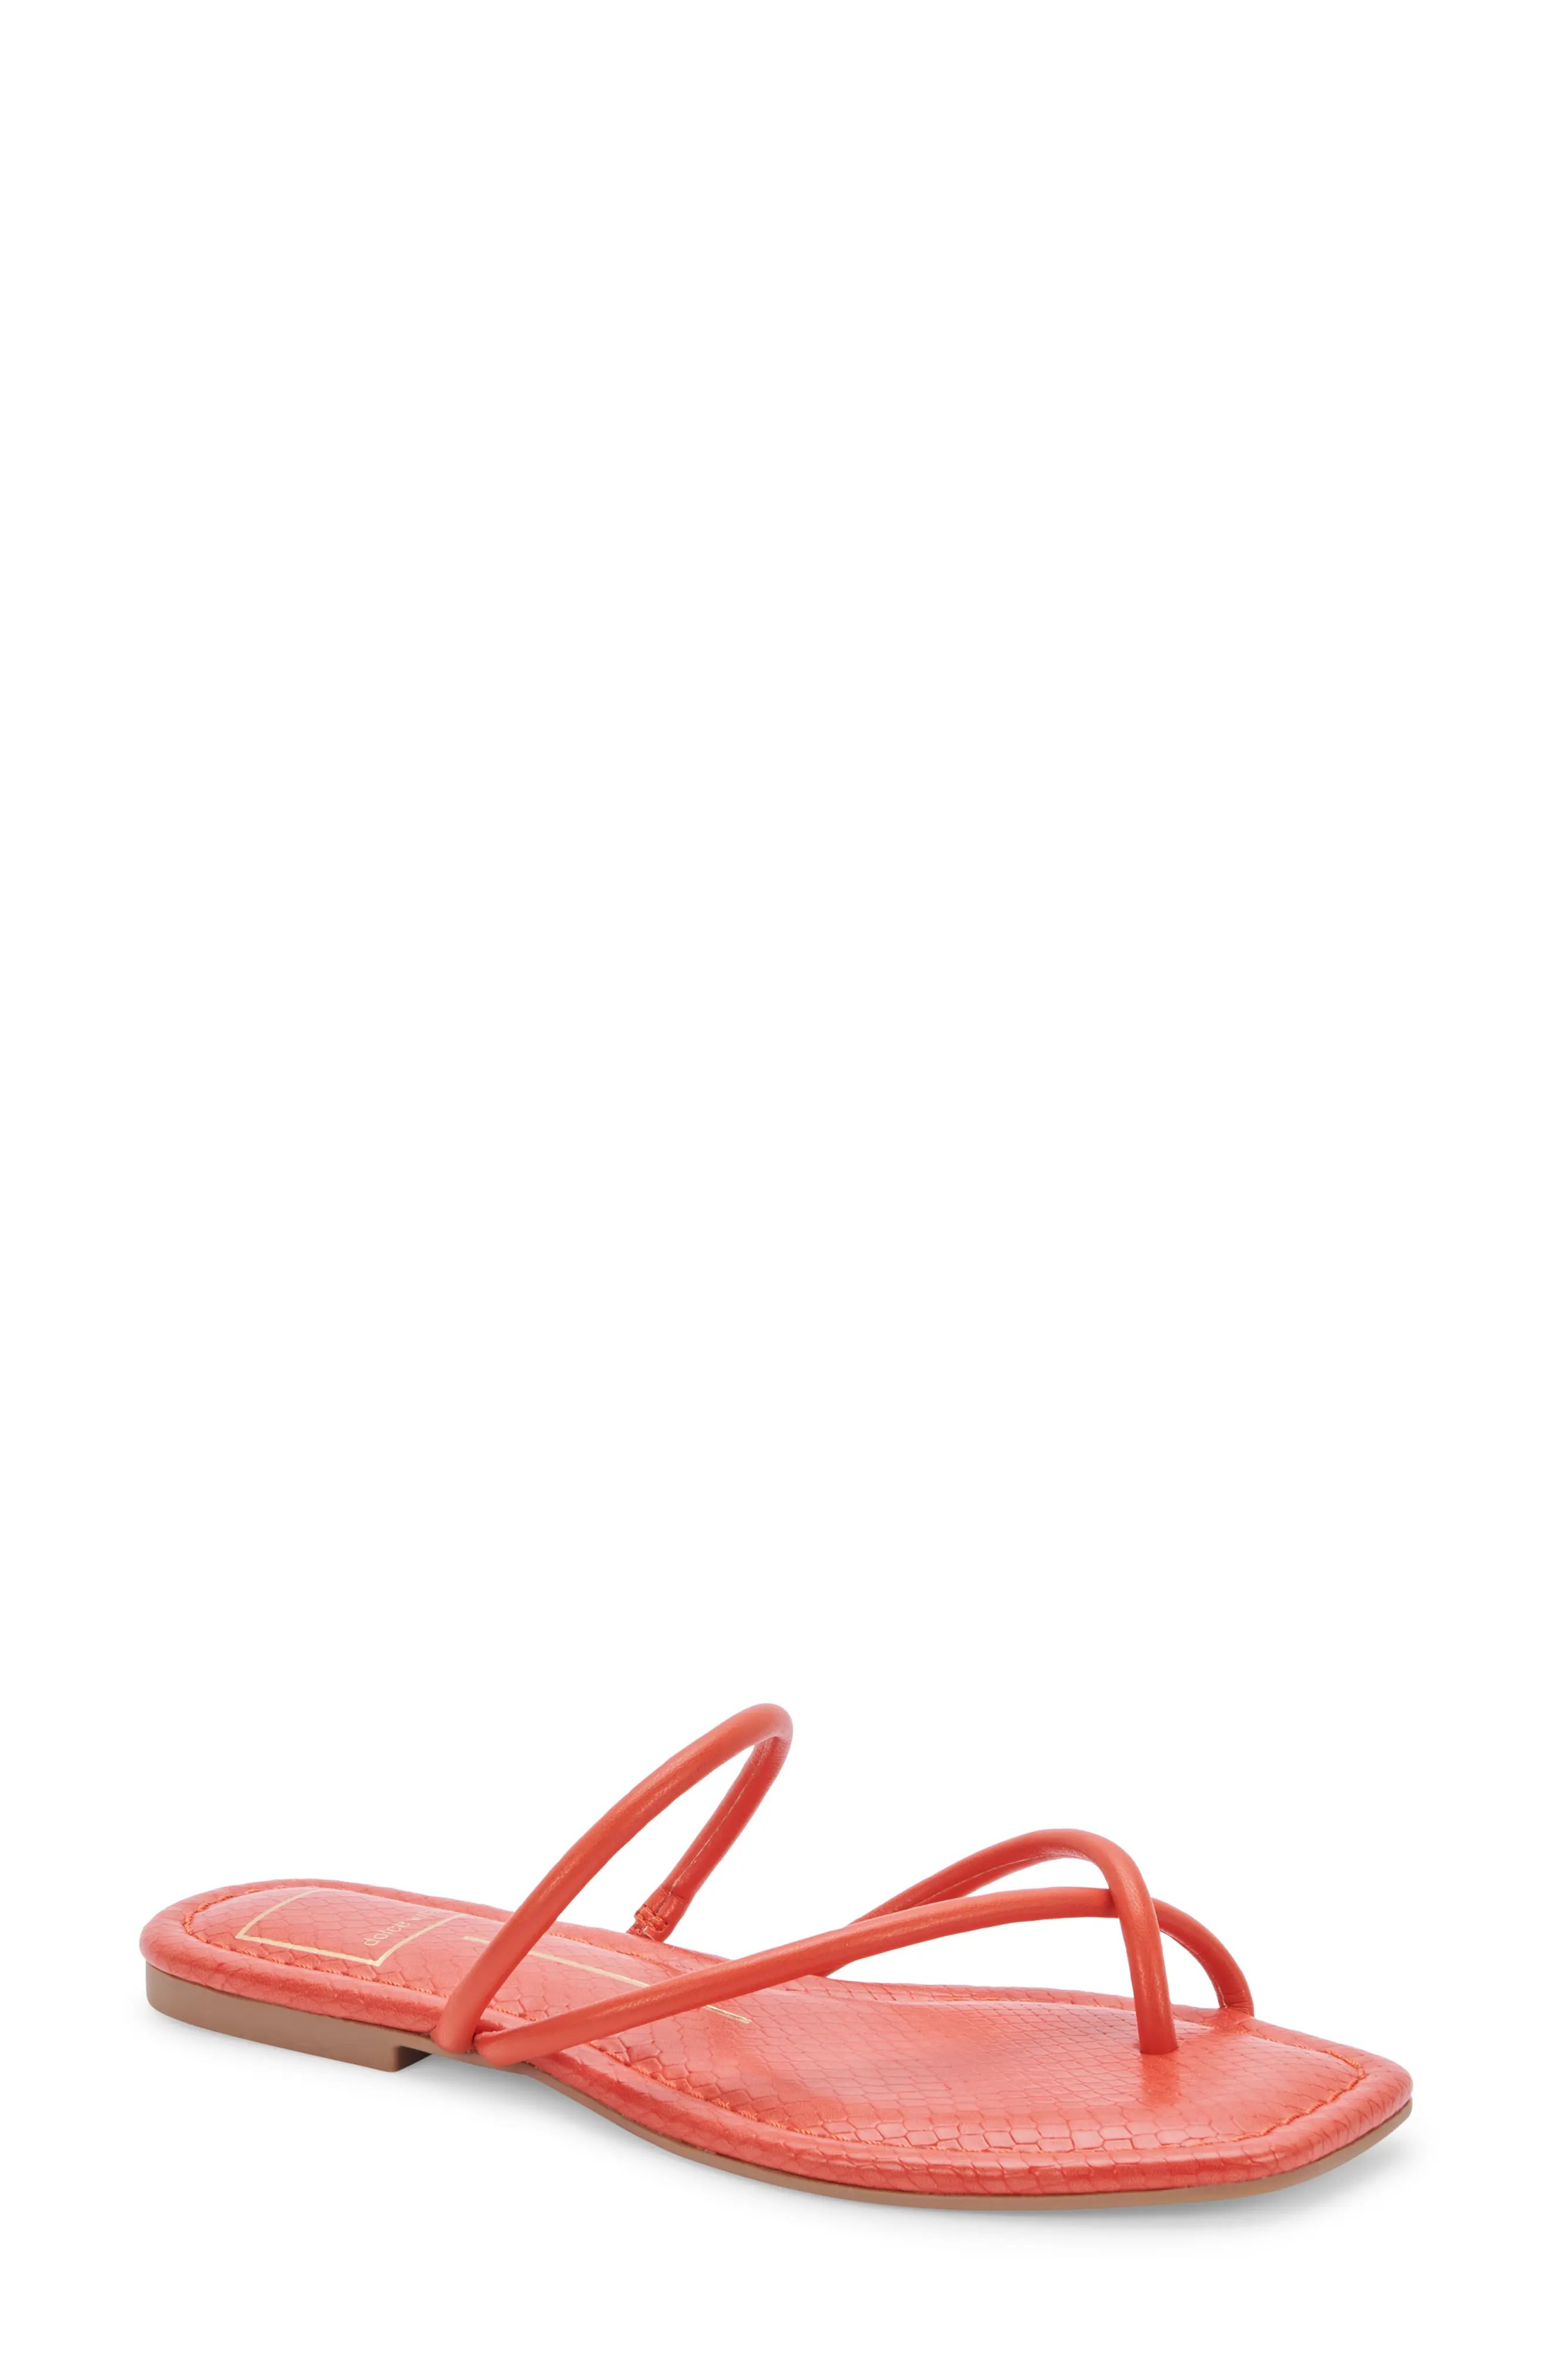 Dolce Vita Leanna Sandal in Persimmon Stella at Nordstrom, Size 7 | Nordstrom